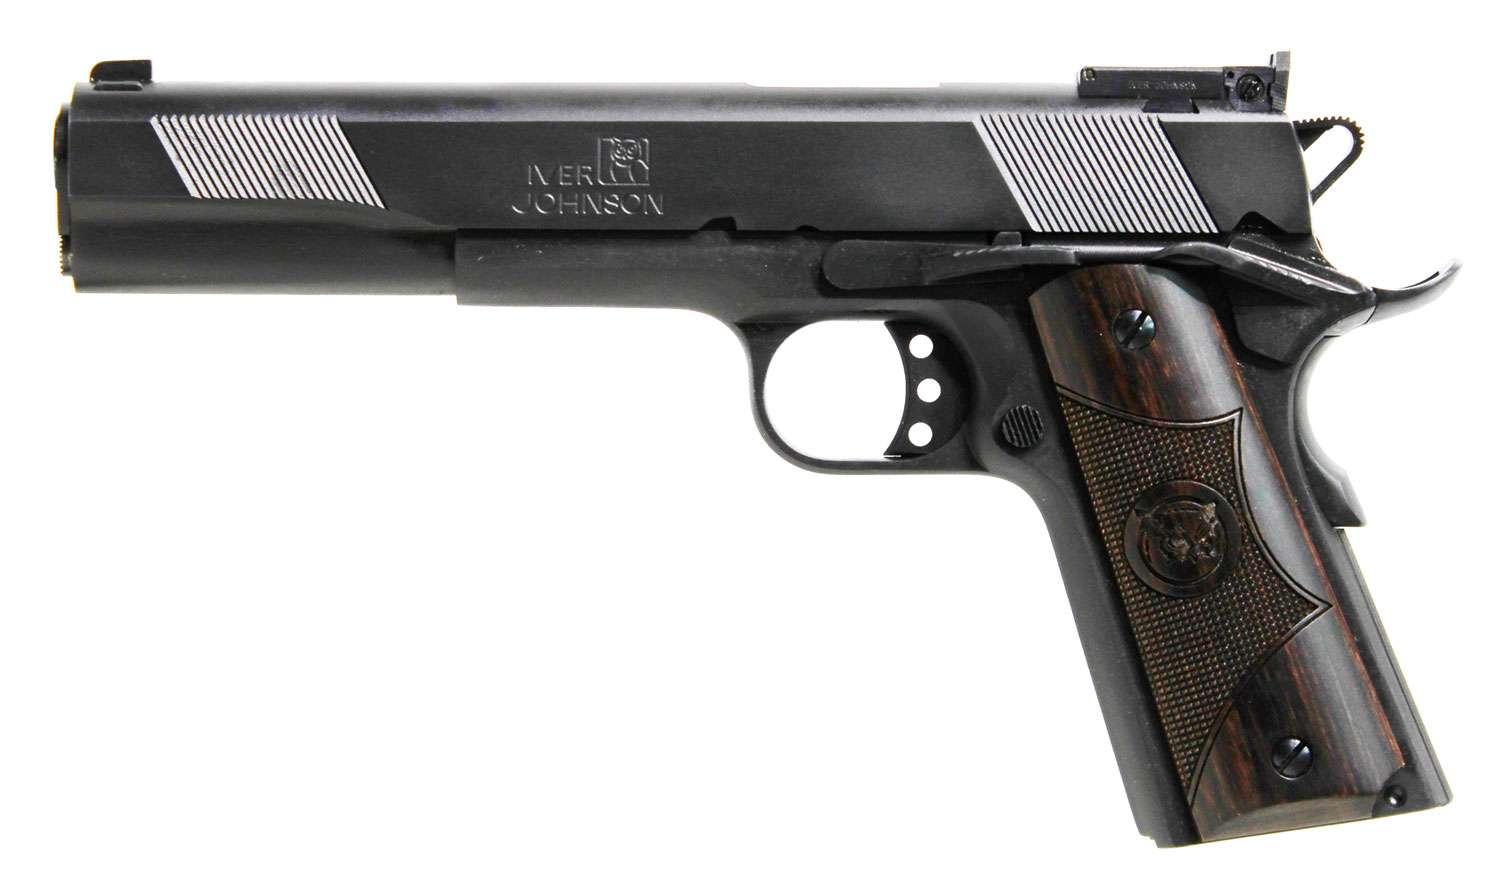 Iver Johnson Arms 1911 Eagle XL 45 ACP 6" 8+1 Matte Blued - $679.99 (Add to Cart)